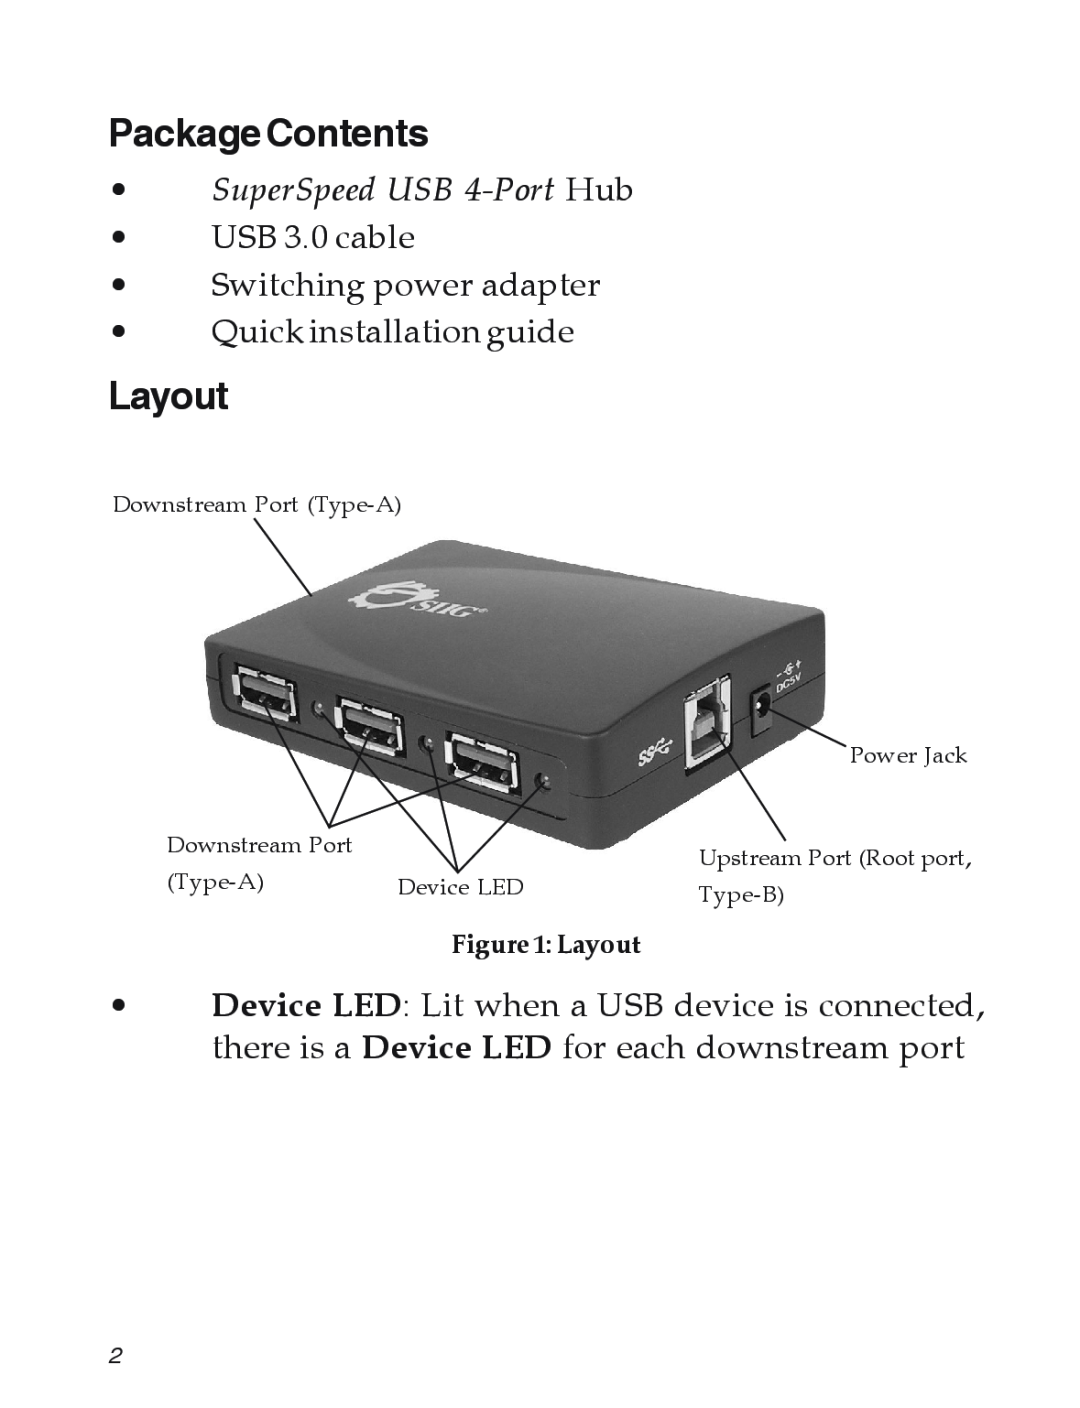 SIIG 04-0625A Package Contents, Layout, Downstream Port Type-A, Power Jack, Upstream Port Root port, Device LED, Type-B 